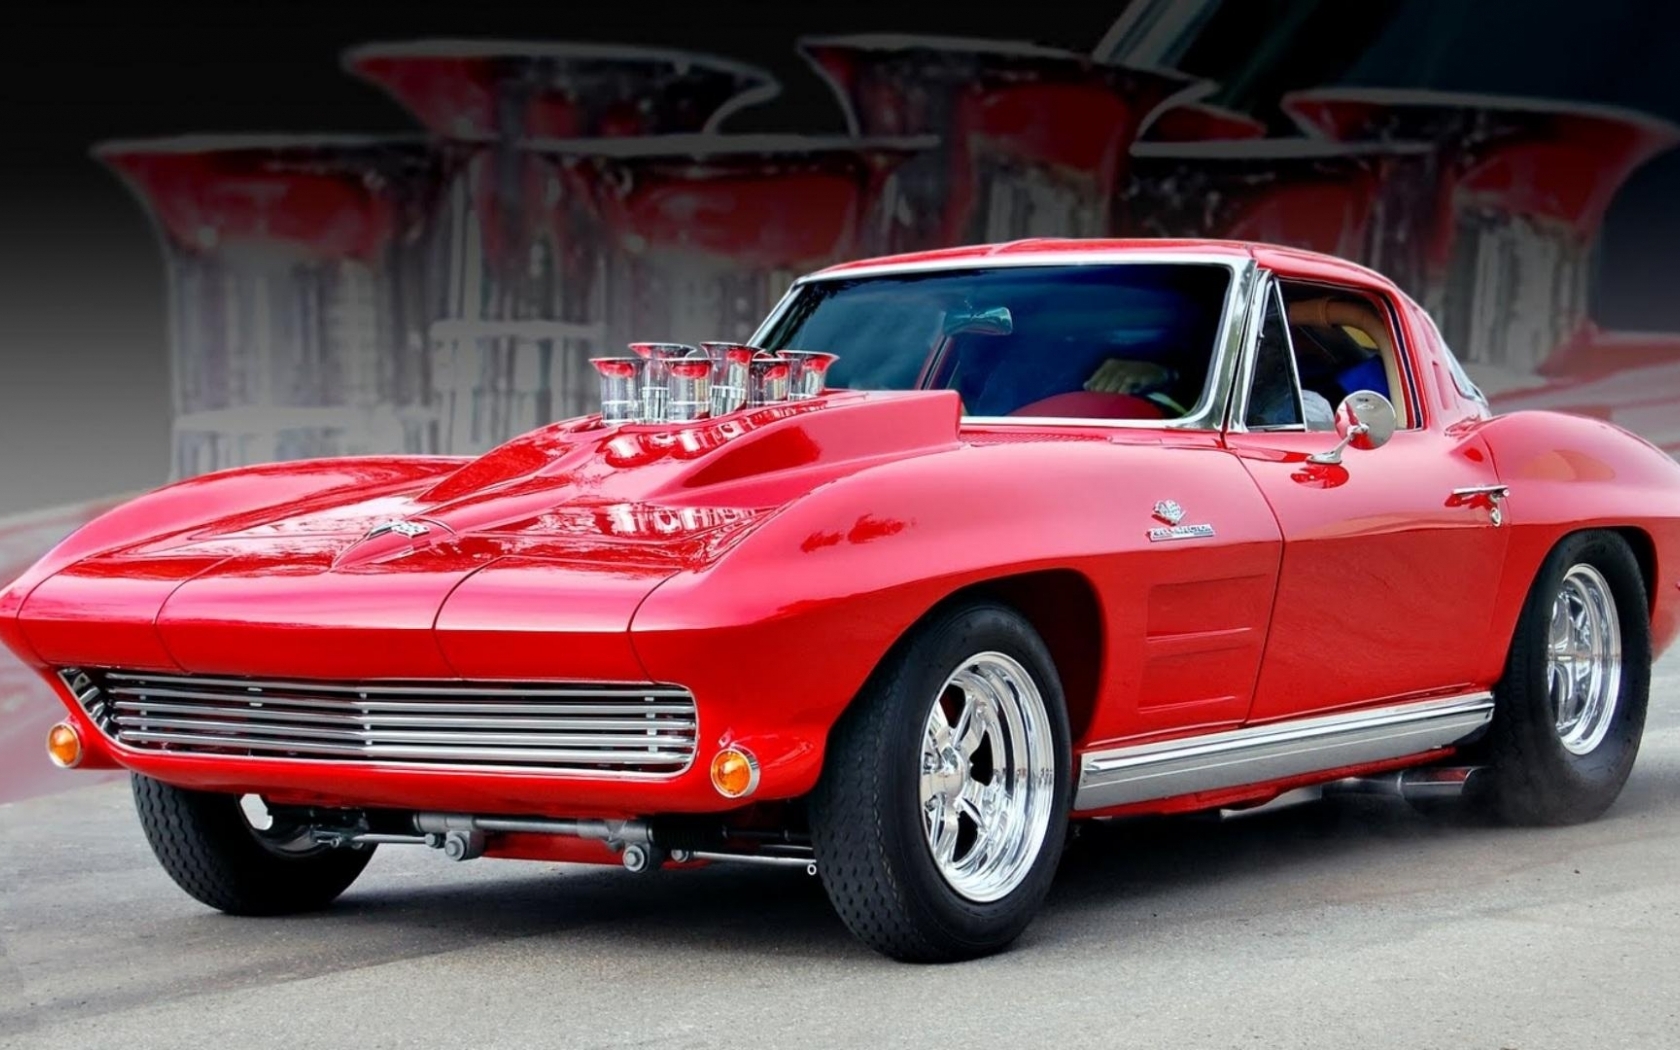 Red Vette Wallpaper In Cars Vehicles With All